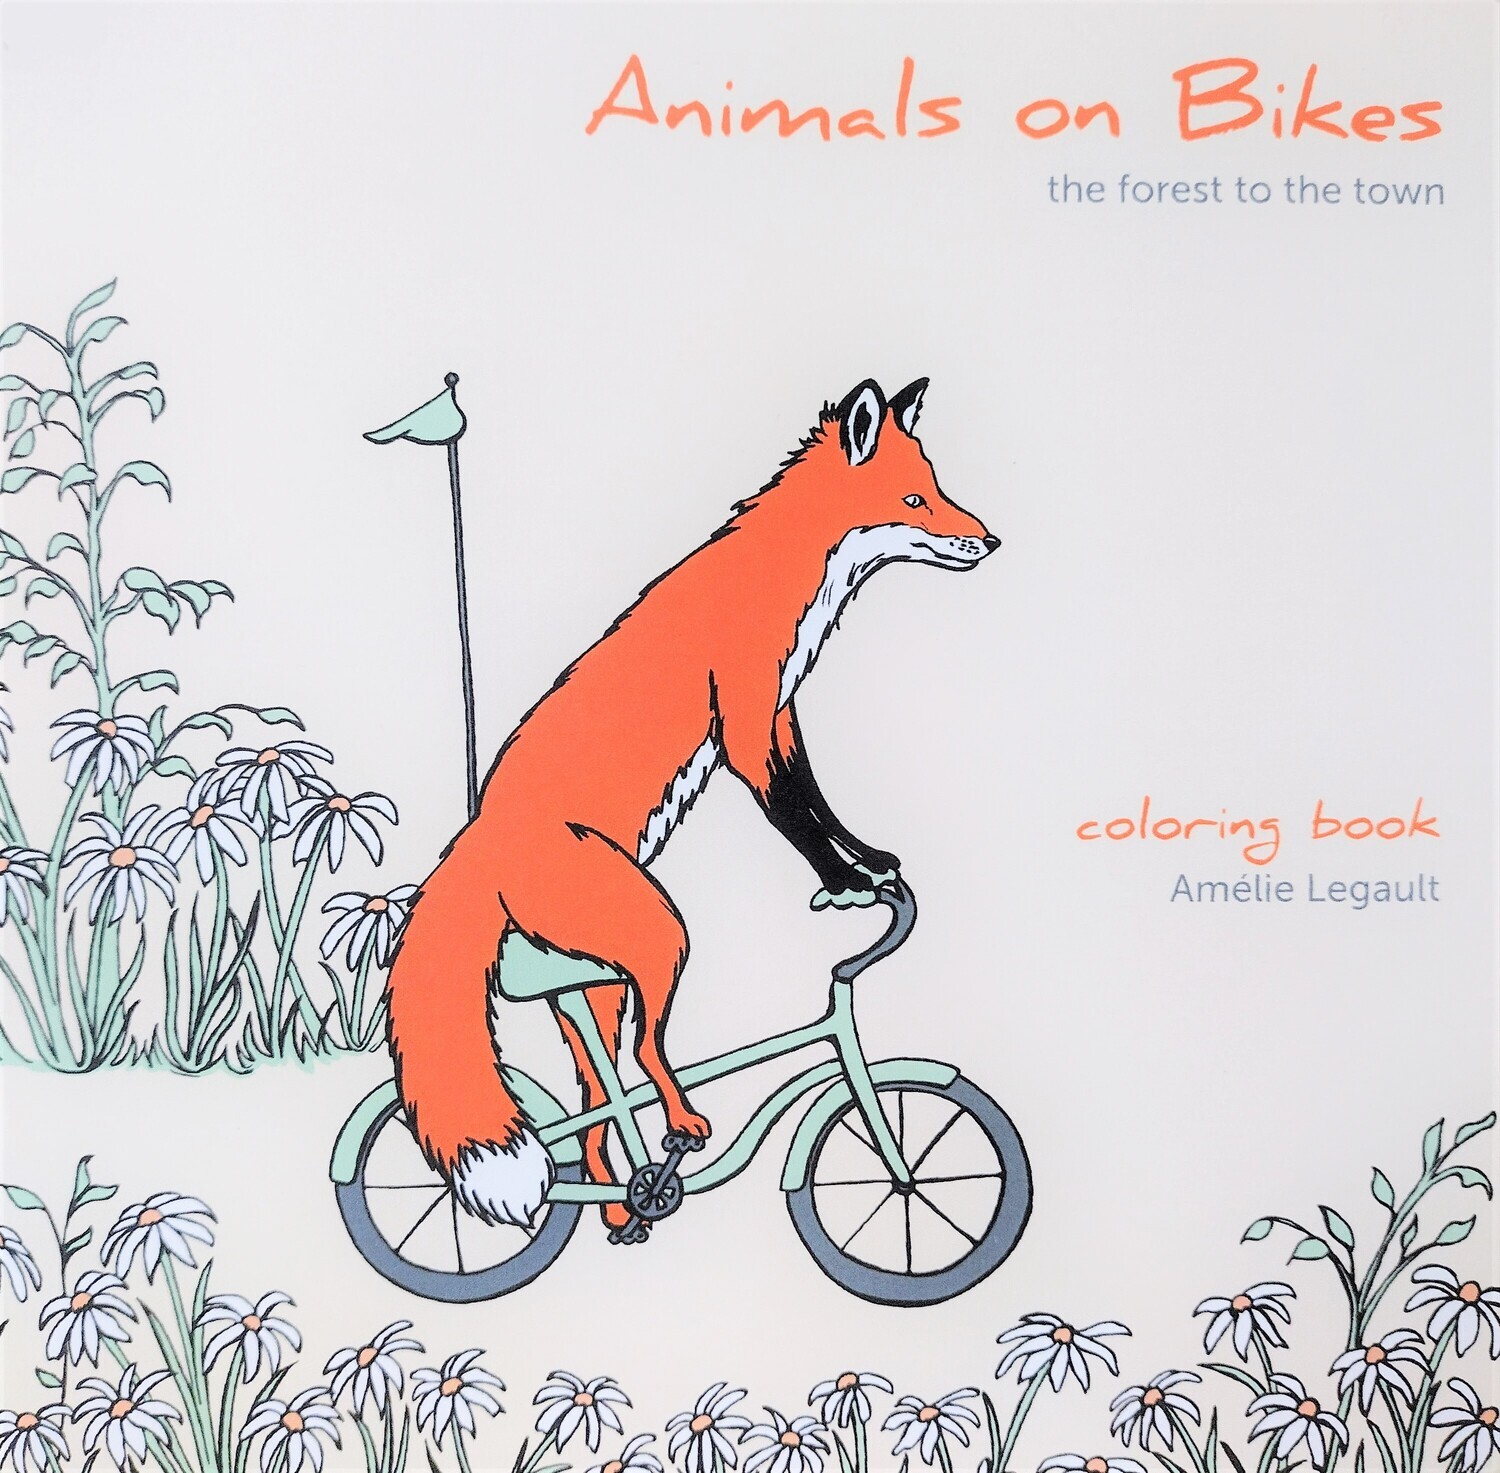 Animals on Bikes: the Forest to the Town - Coloring Book by Amelie Legault